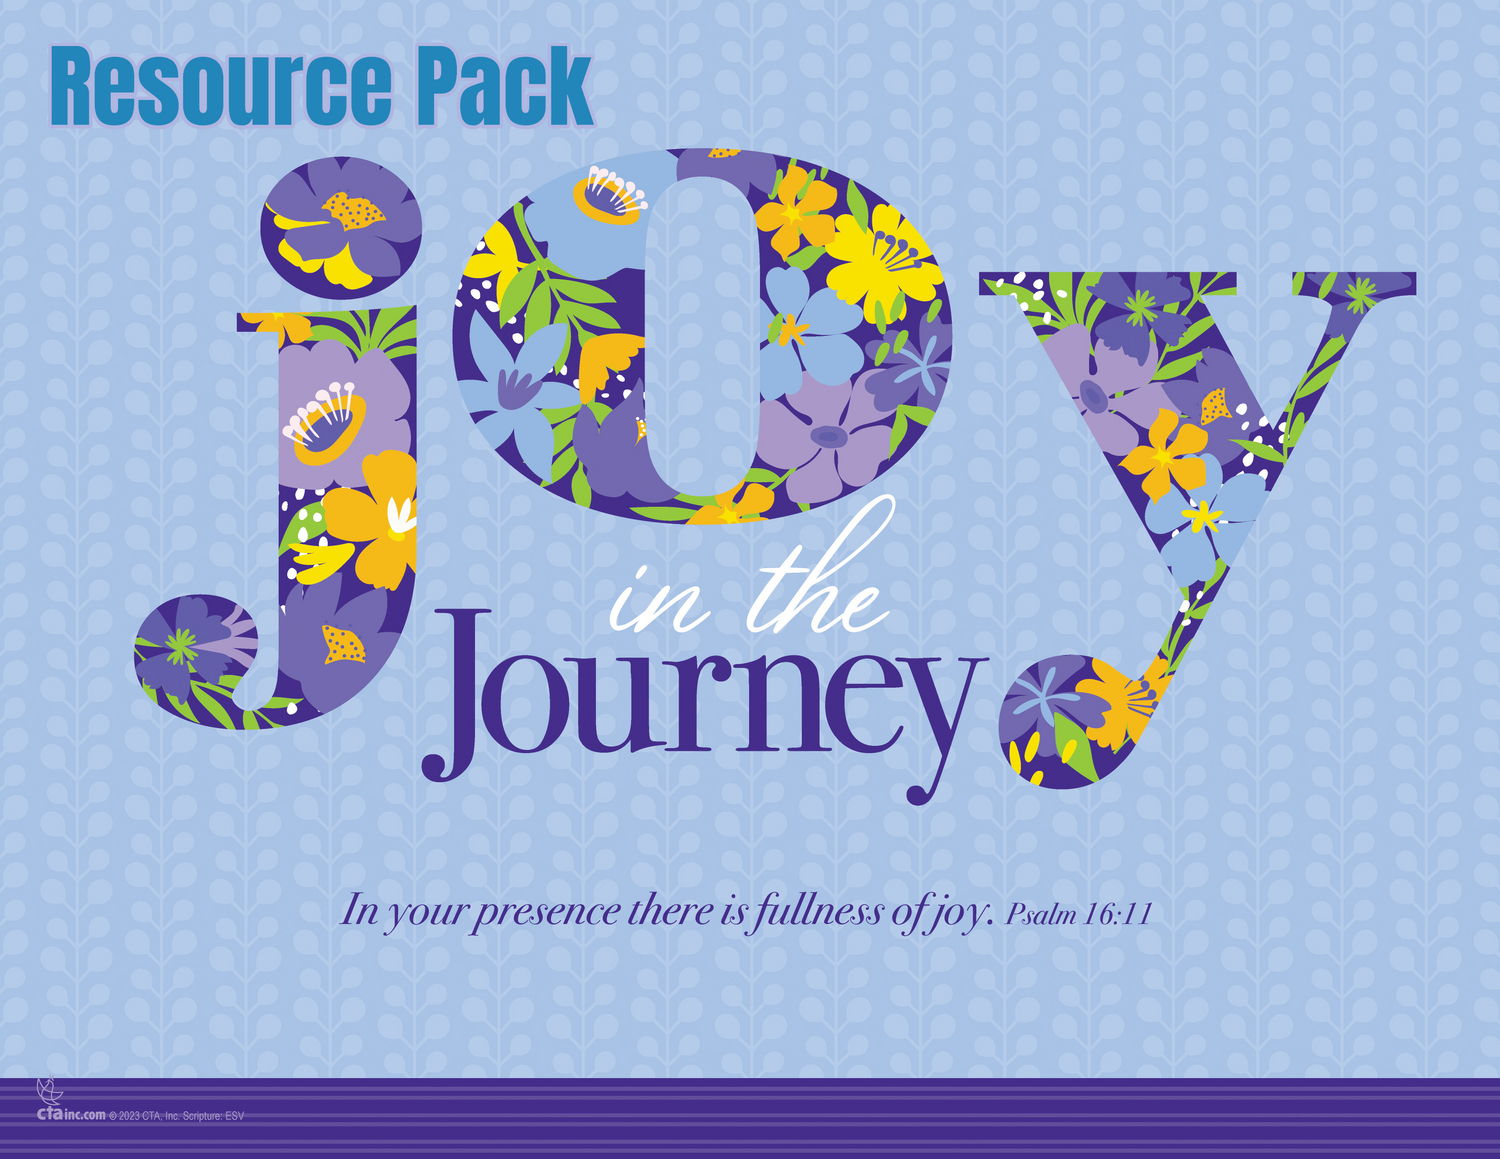 Resource Pack  - Joy in the Journey